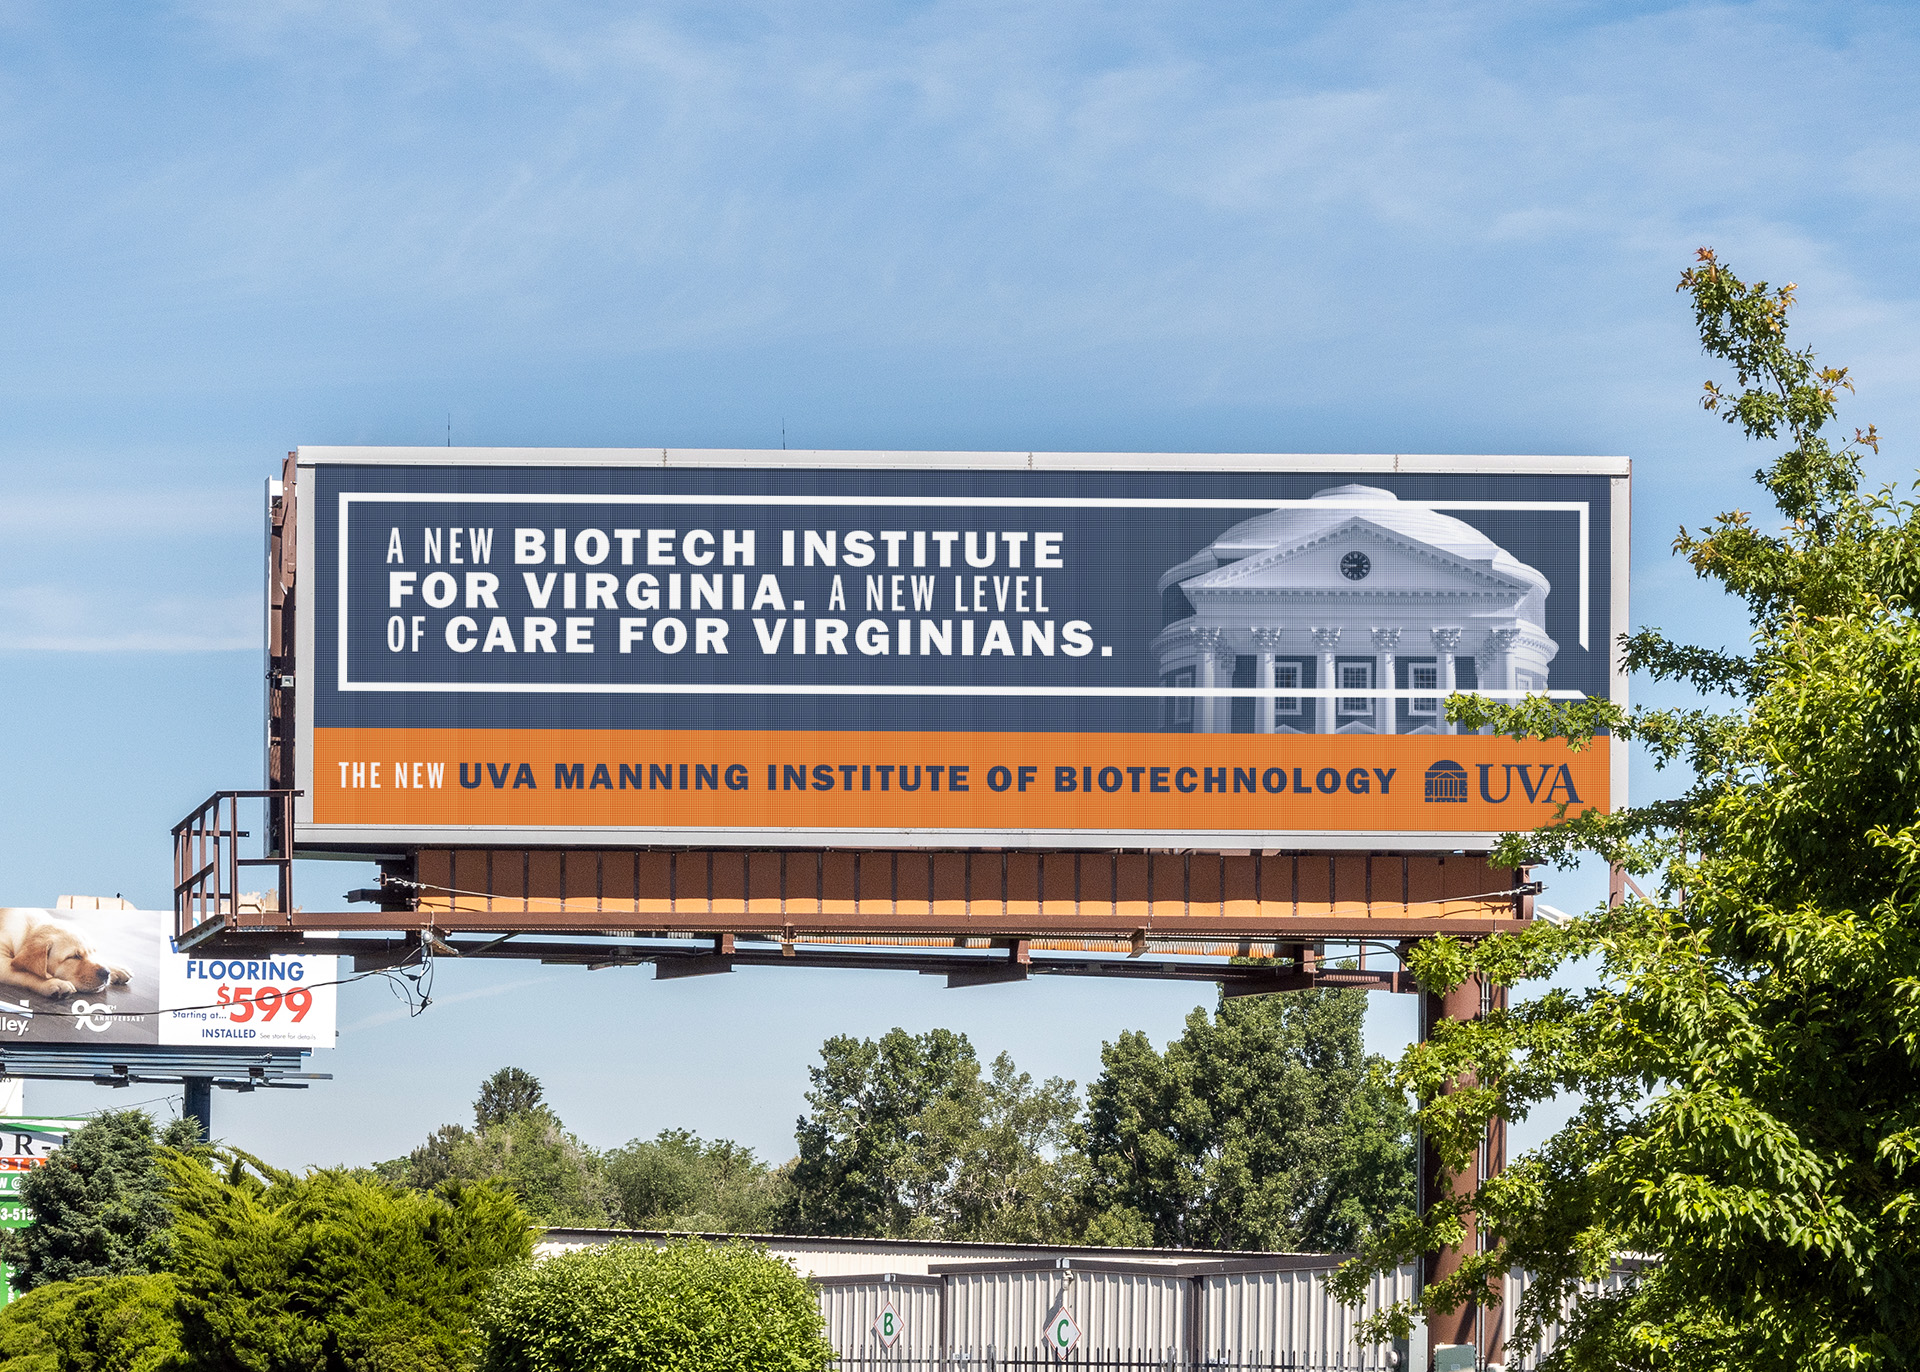 UVA Manning Institute of Biotechnology ad on a billboard